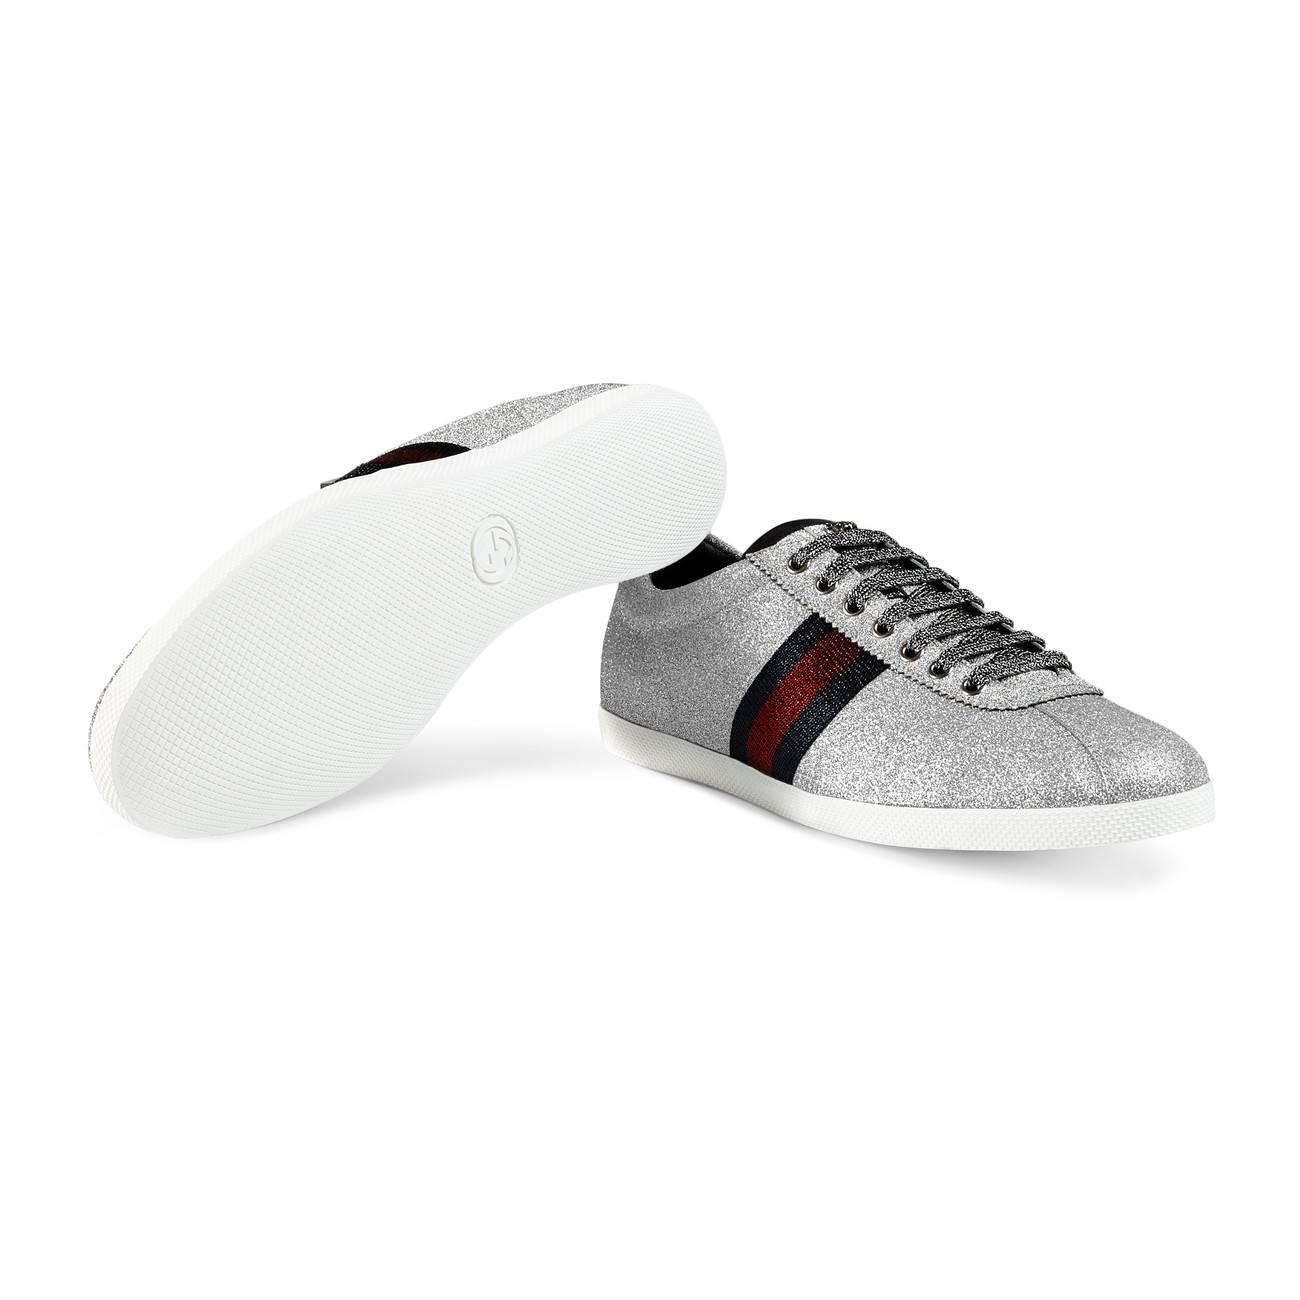 silver sparkly gucci shoes